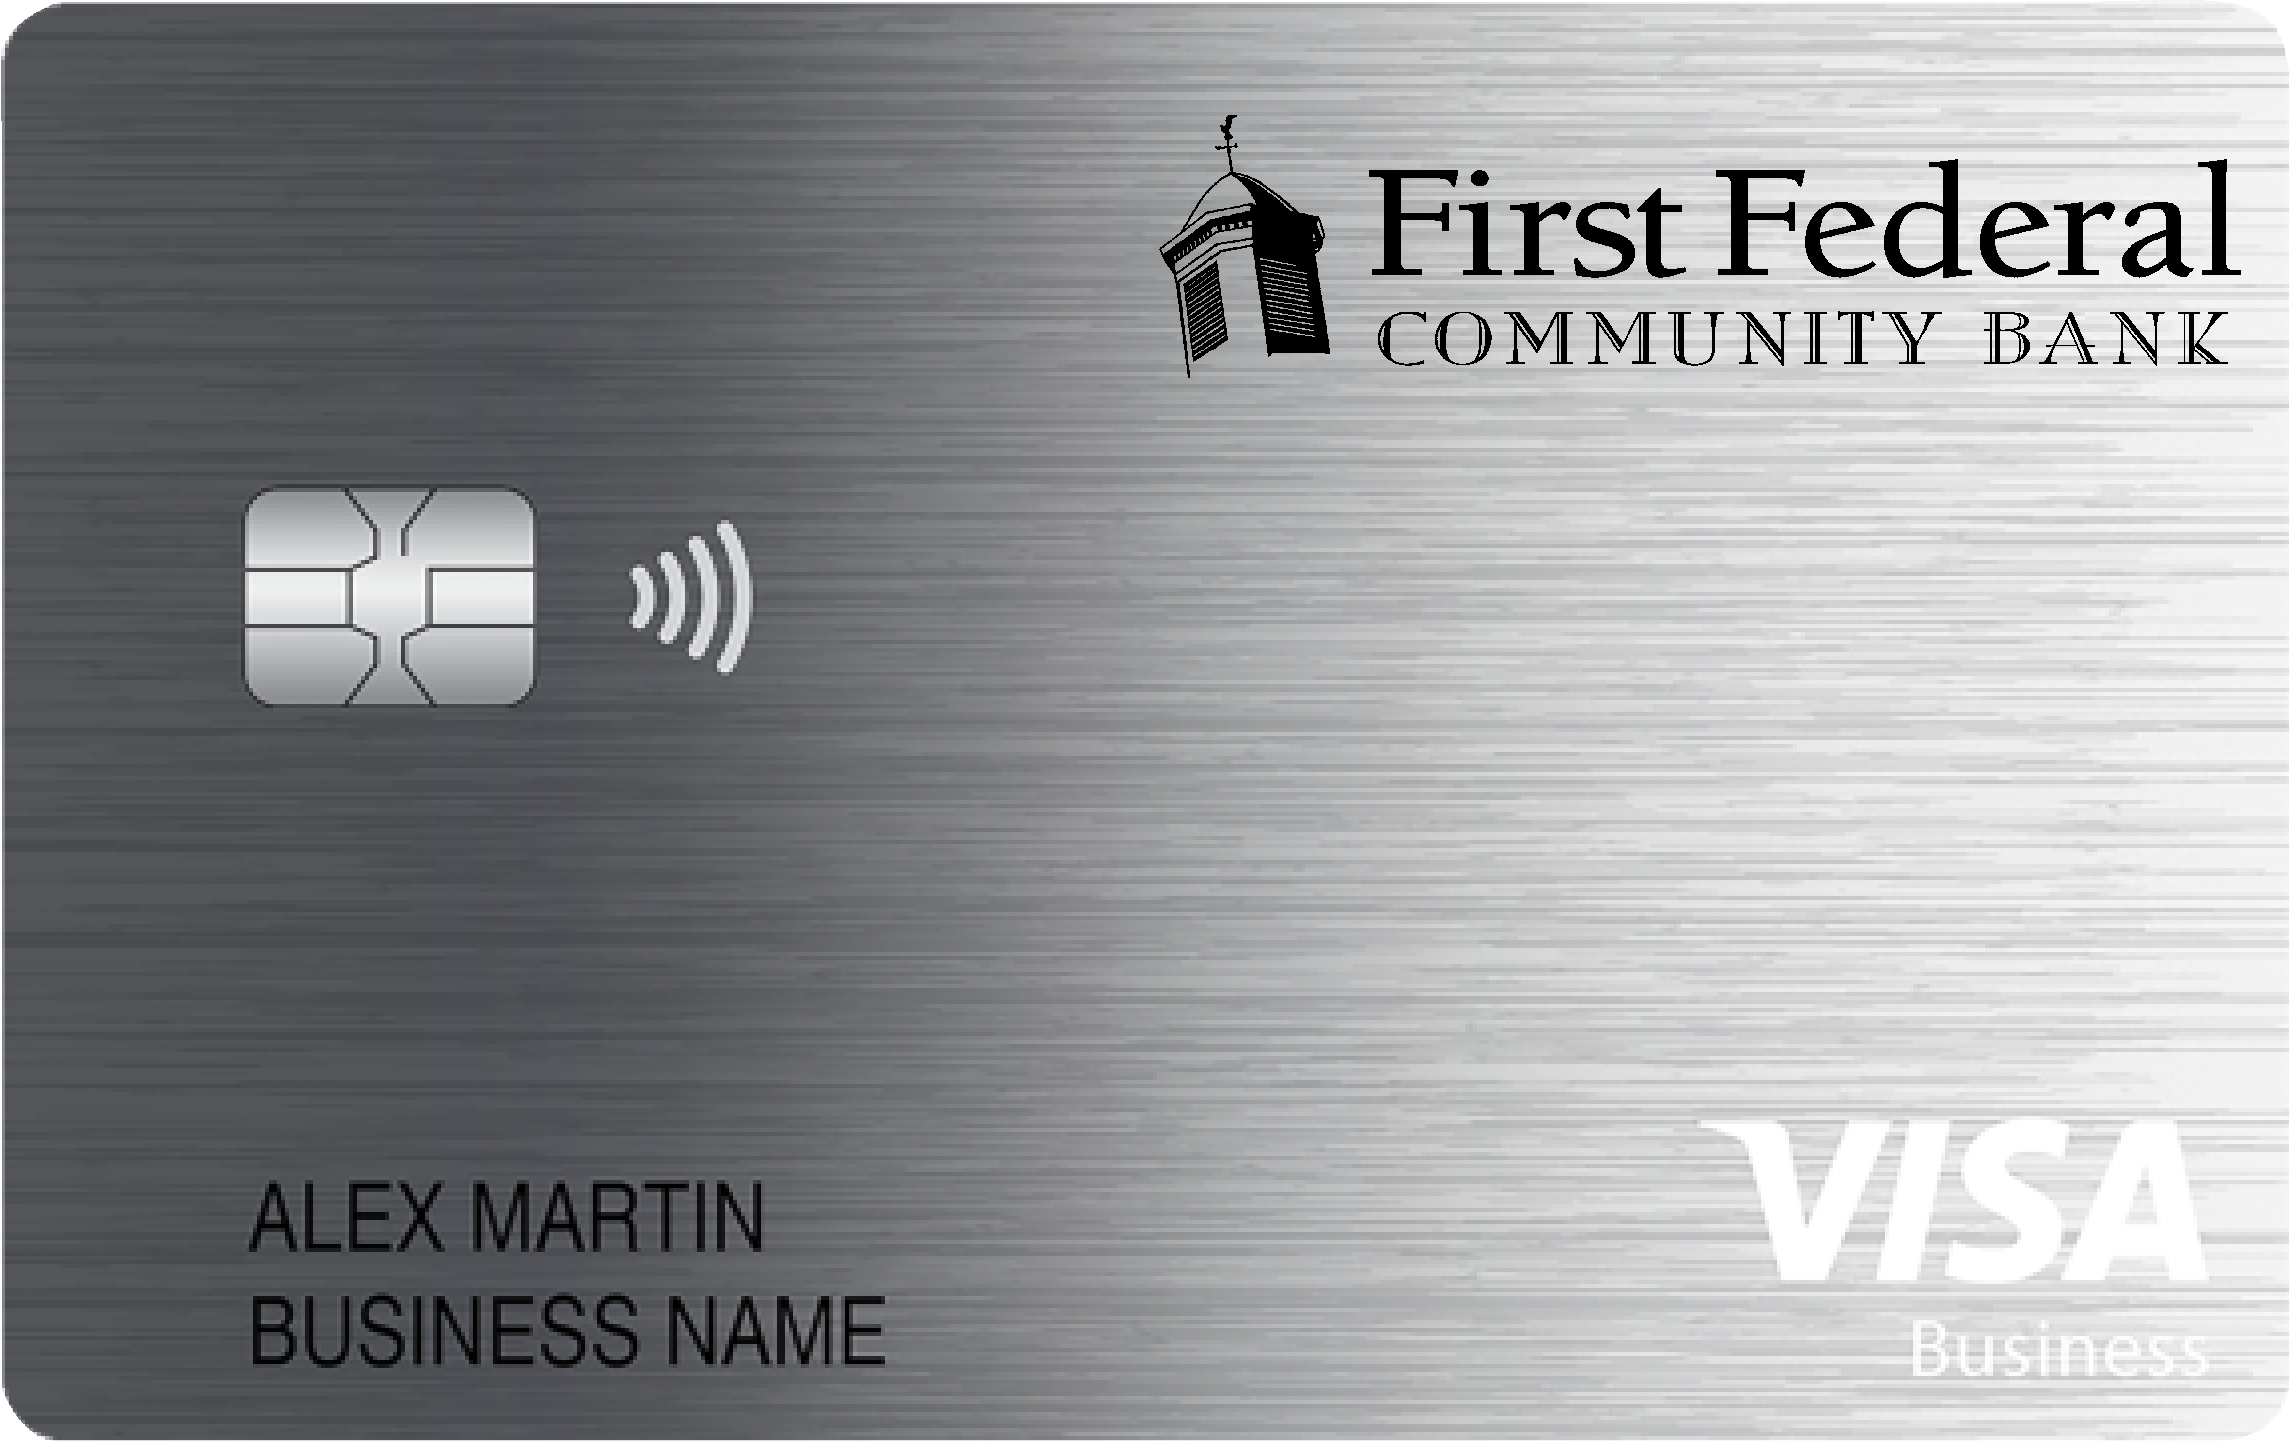 First Federal Community Bank Business Real Rewards Card